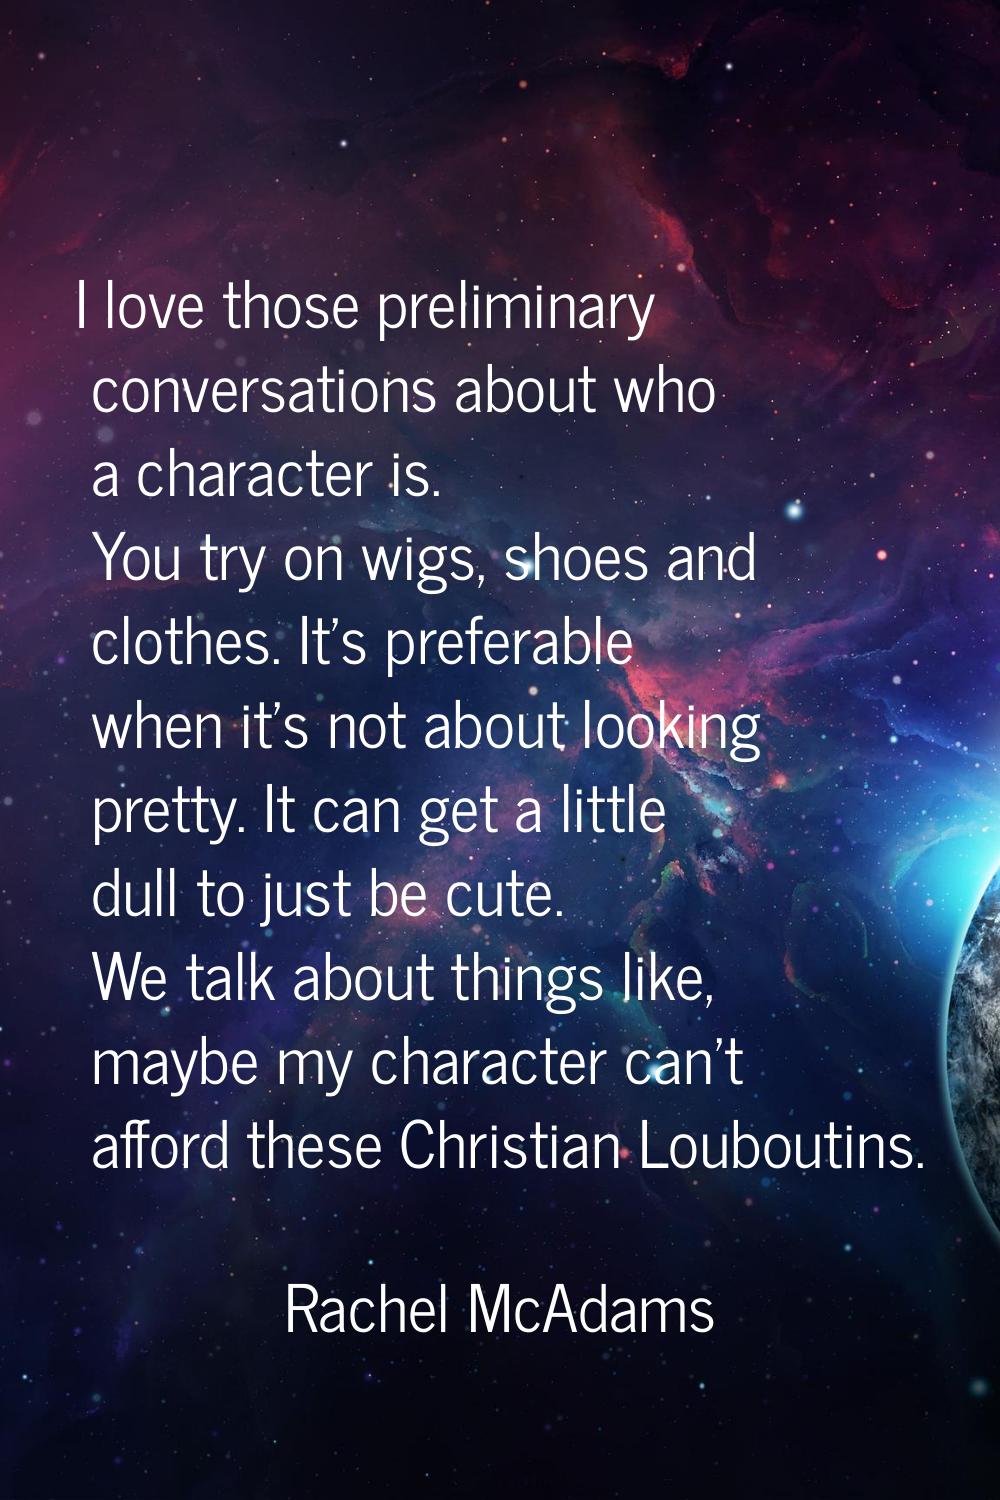 I love those preliminary conversations about who a character is. You try on wigs, shoes and clothes